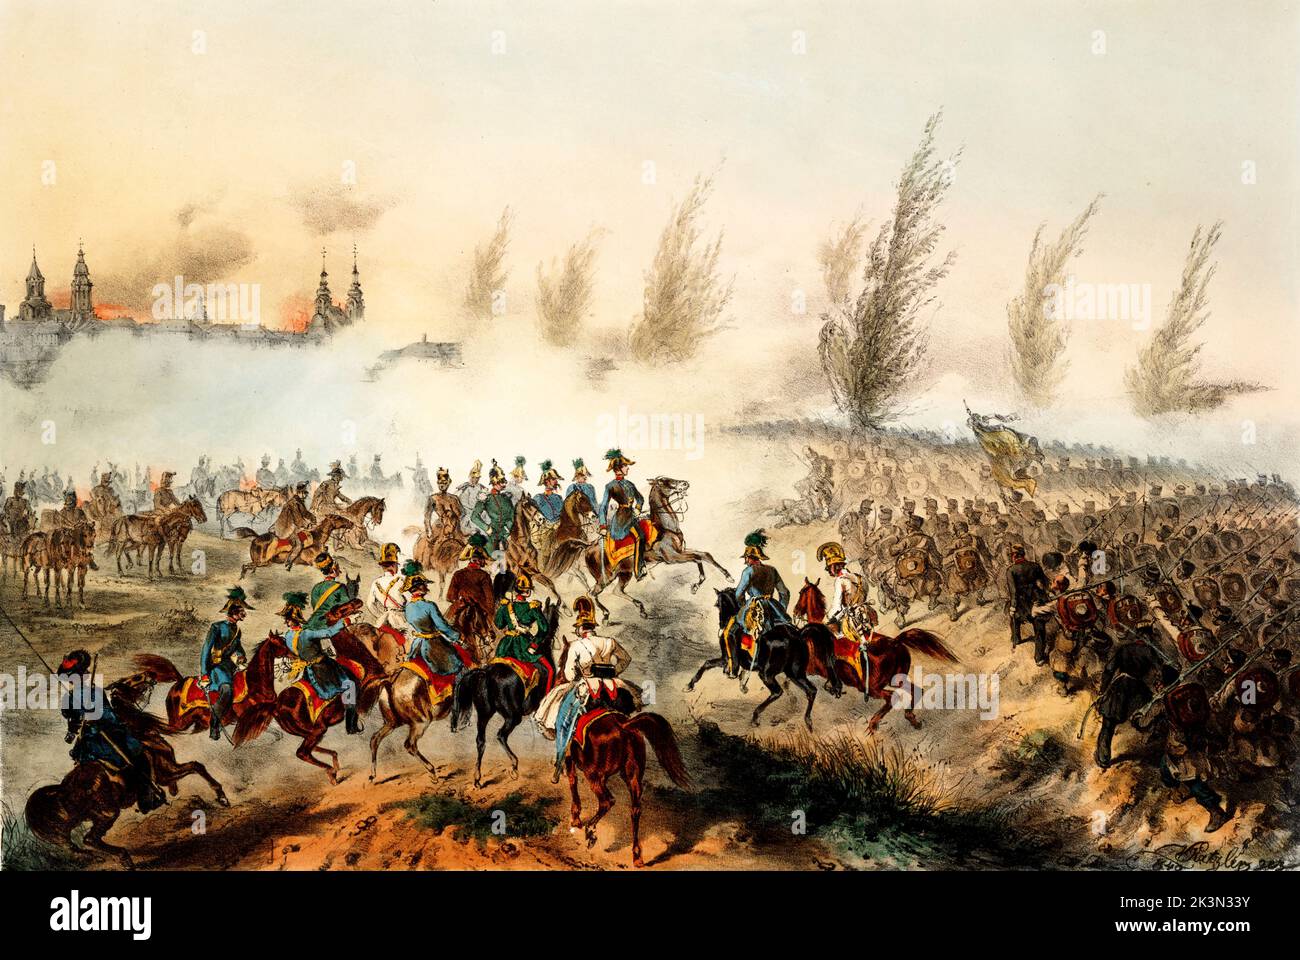 The Battle of Győr on 28 June 1849. Franz Joseph enters Győr leading the Austrian troops. By Vinzenz Katzler  The Battle of Győr took place during the Summer Campaign of the Hungarian War of Independence. It was fought 28 June 1849 in the Hungarian city of Győr. Stock Photo